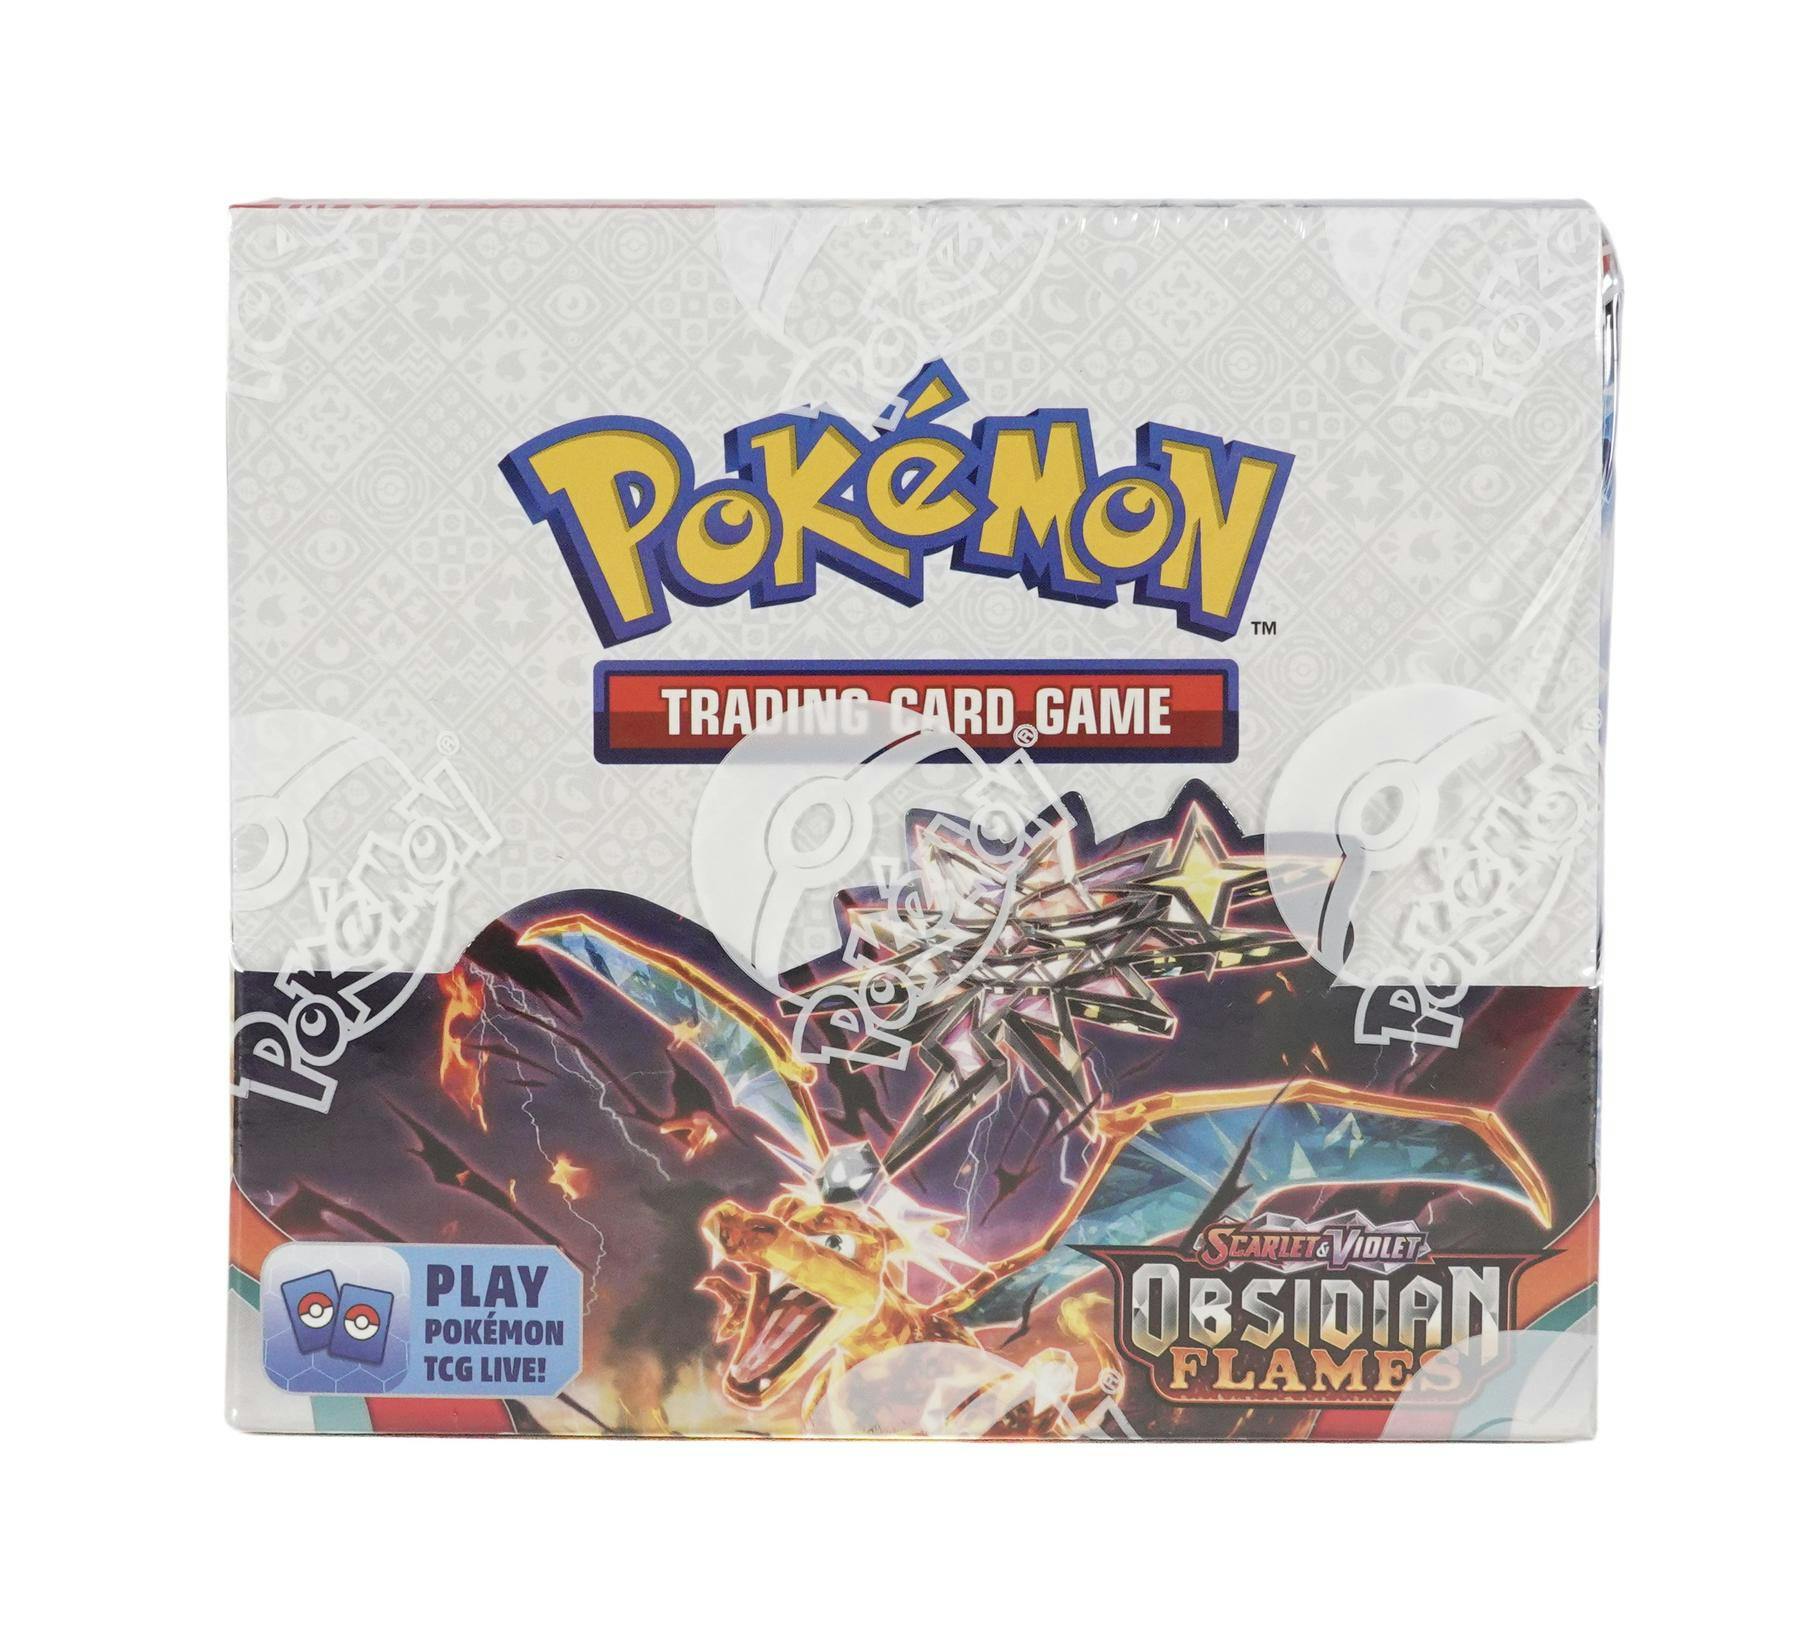 What Sets To Buy From Pokemon TCG Scarlet & Violet: Obsidian Flames